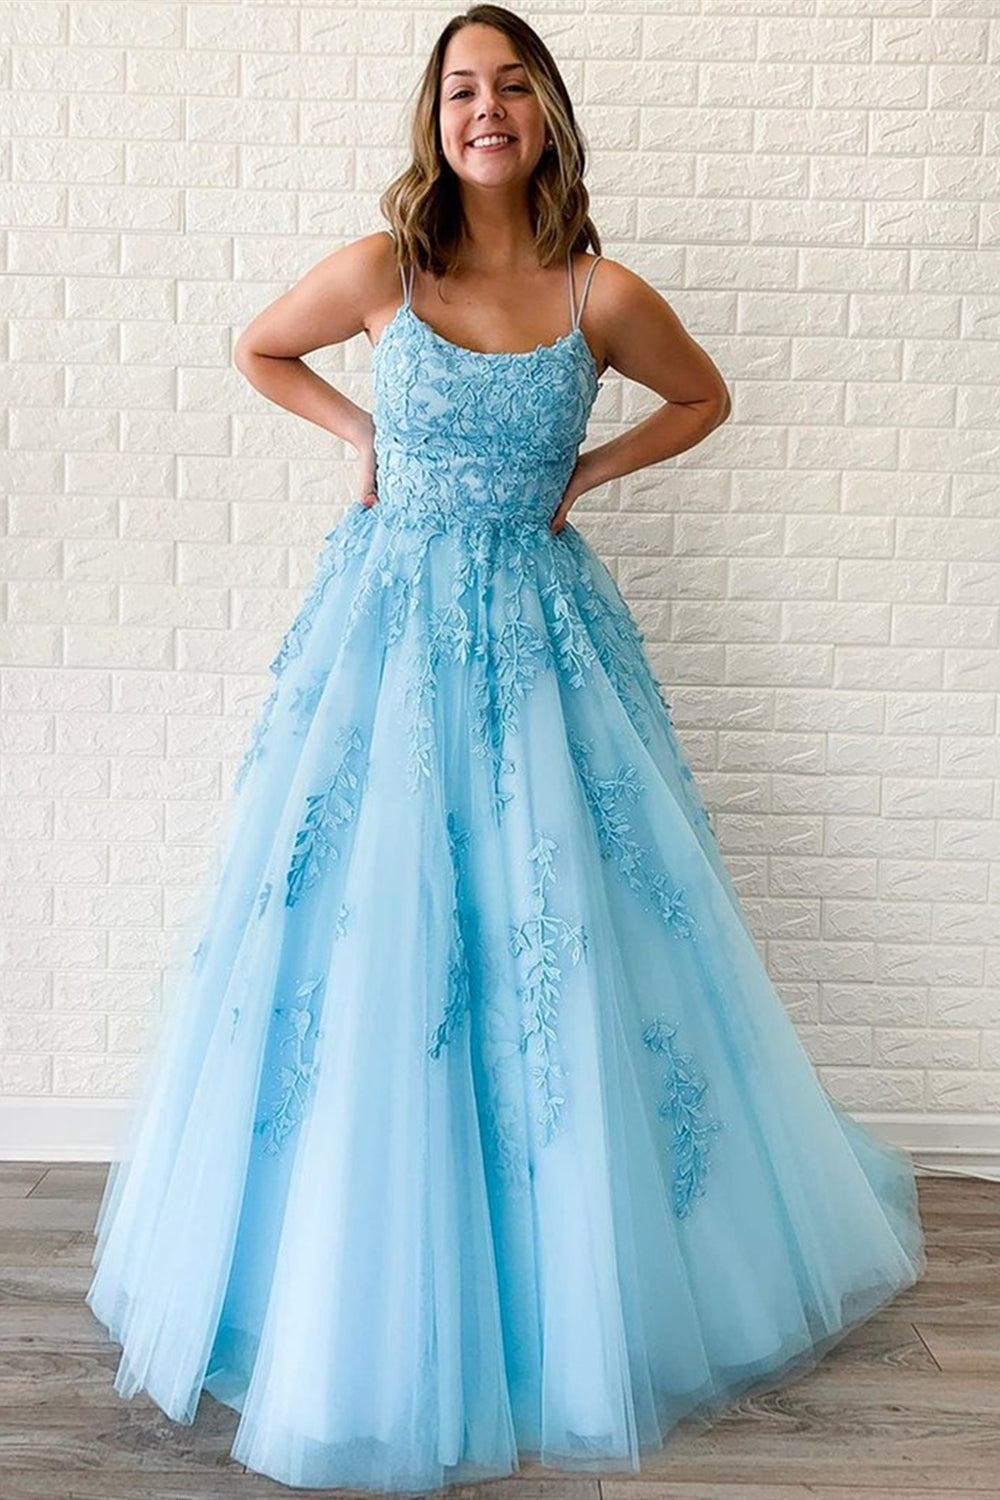 A Line Backless Light Blue Lace Long Prom Dresses, Open Back Light Blue Formal Dresses, Light Blue Lace Evening Dresses EP1569